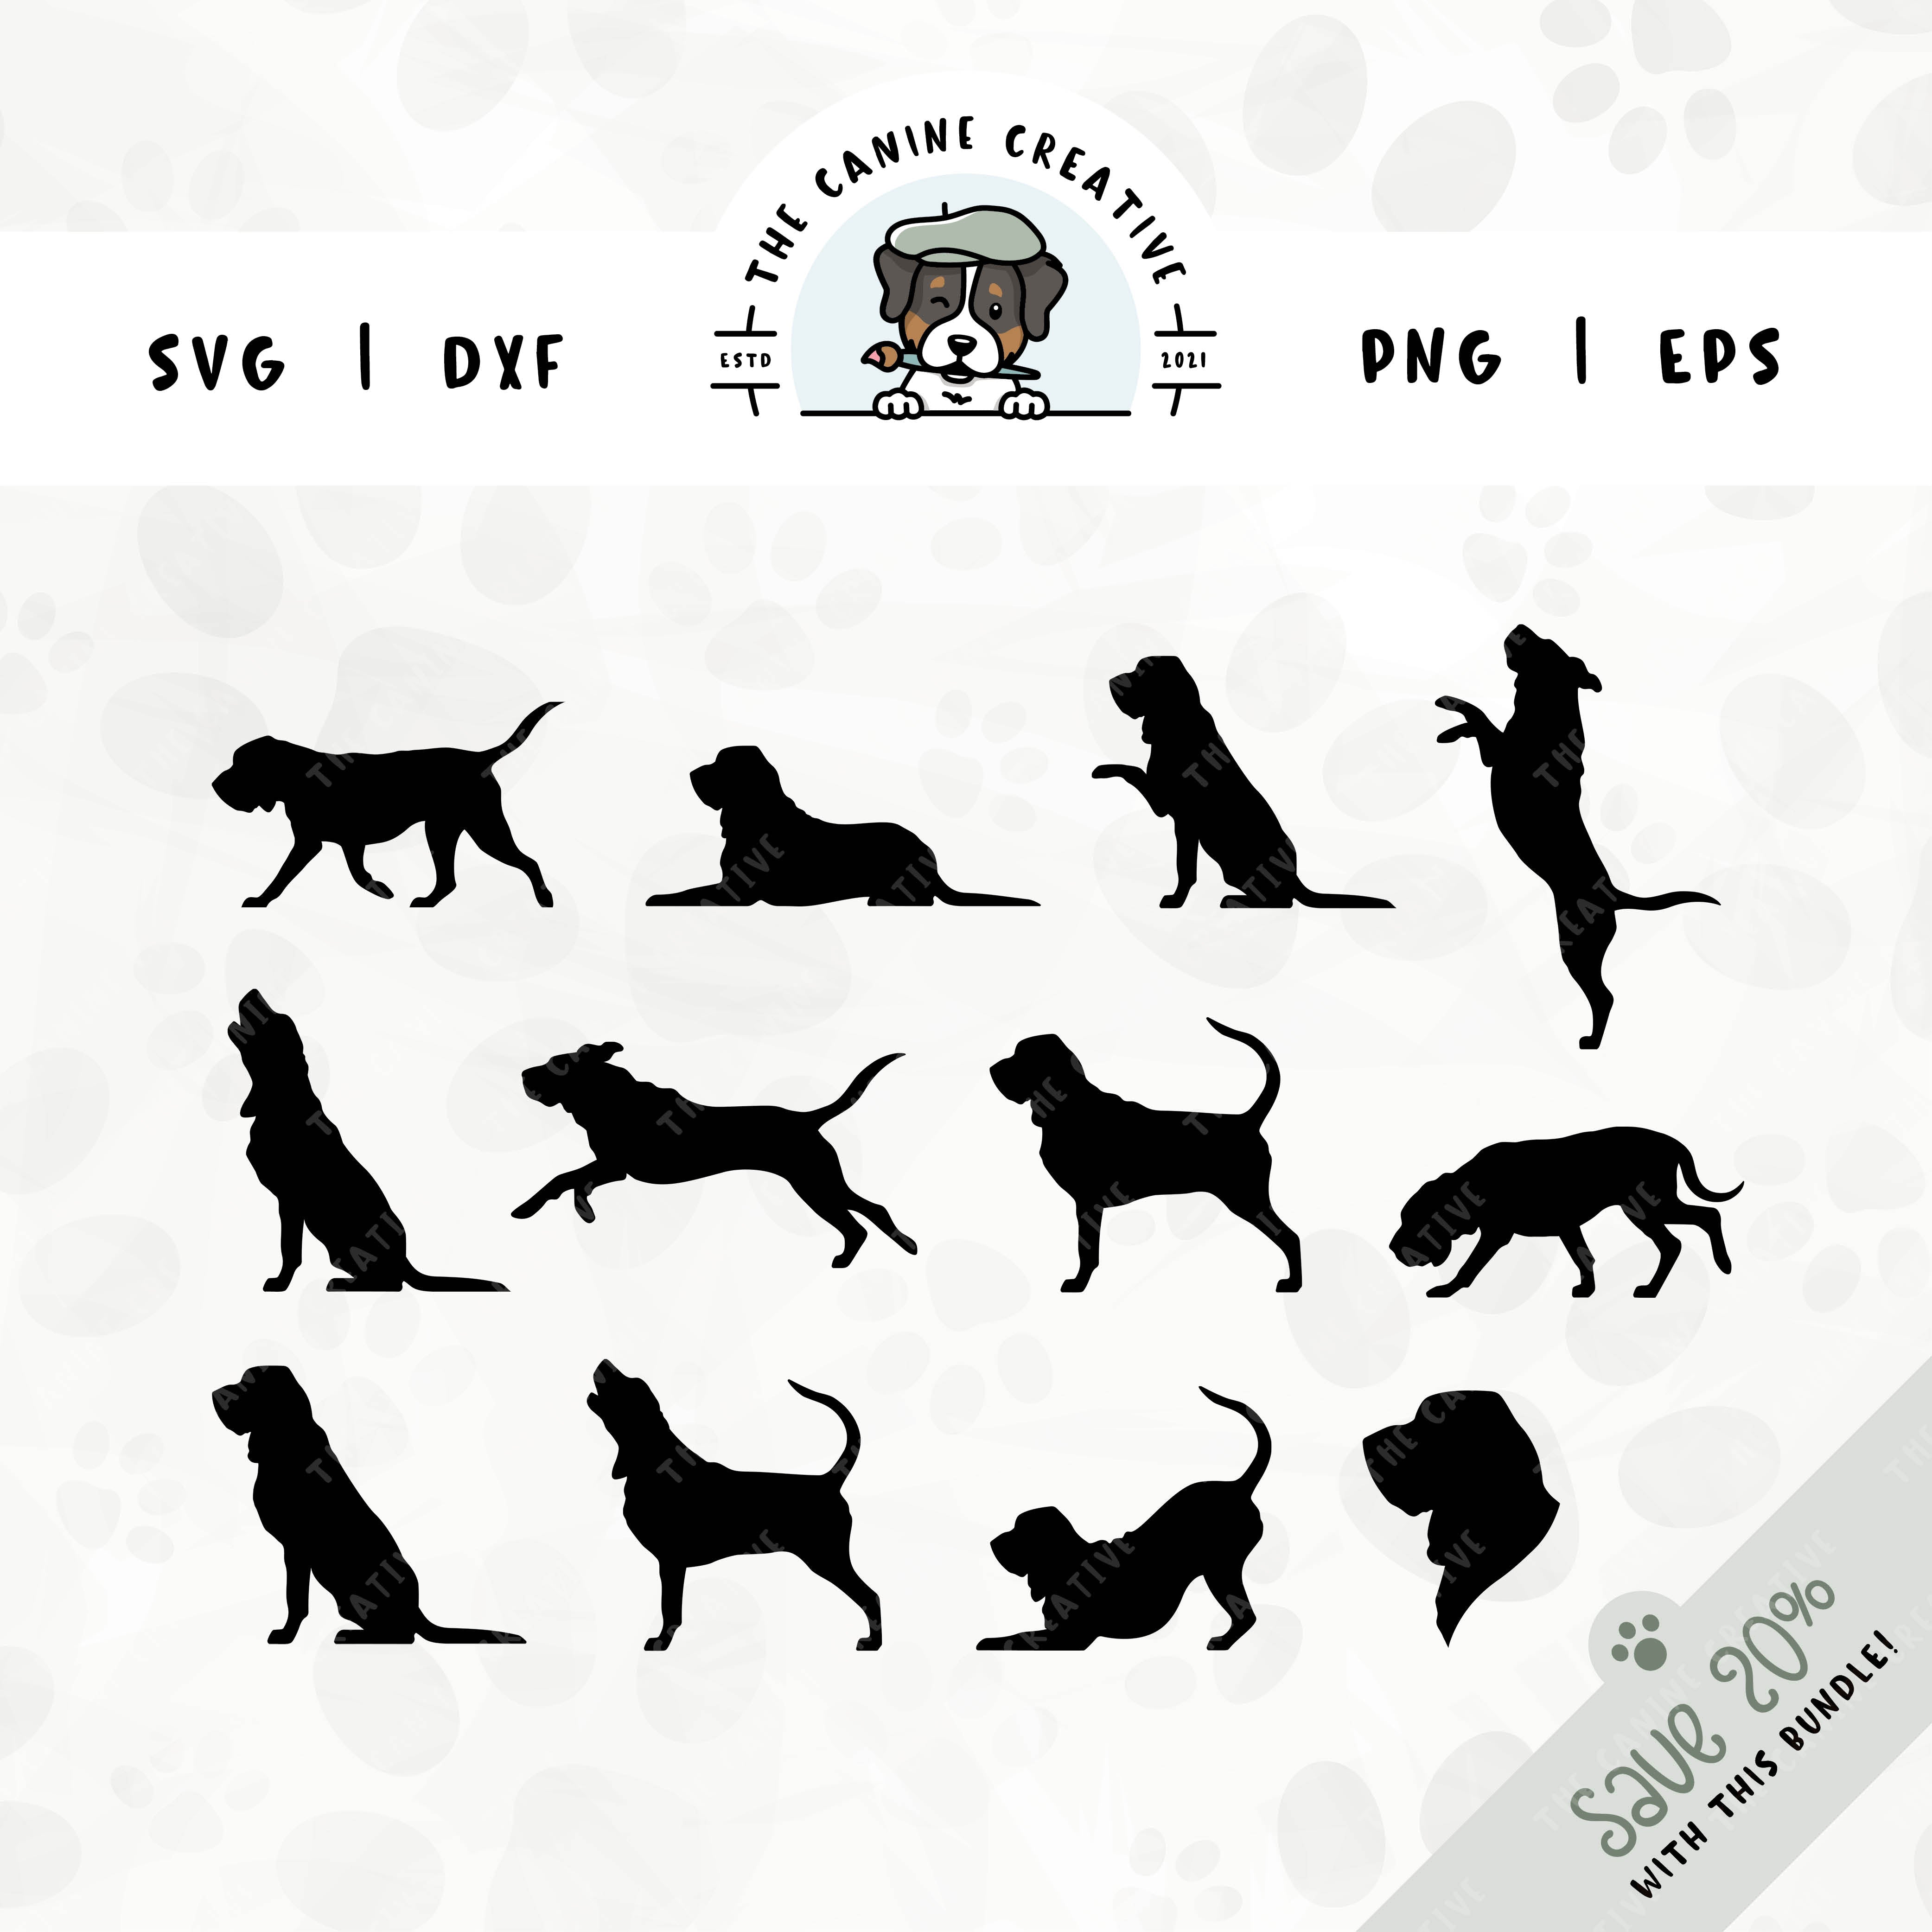 This 12-pack Bloodhound silhouette bundle (set 2) features a dog's head in profile, along with various poses including running, laying down, playing, standing, sitting, walking, jumping up, howling, baying, sniffing, and shaking a paw. File formats include: SVG, DXF, PNG, and EPS.